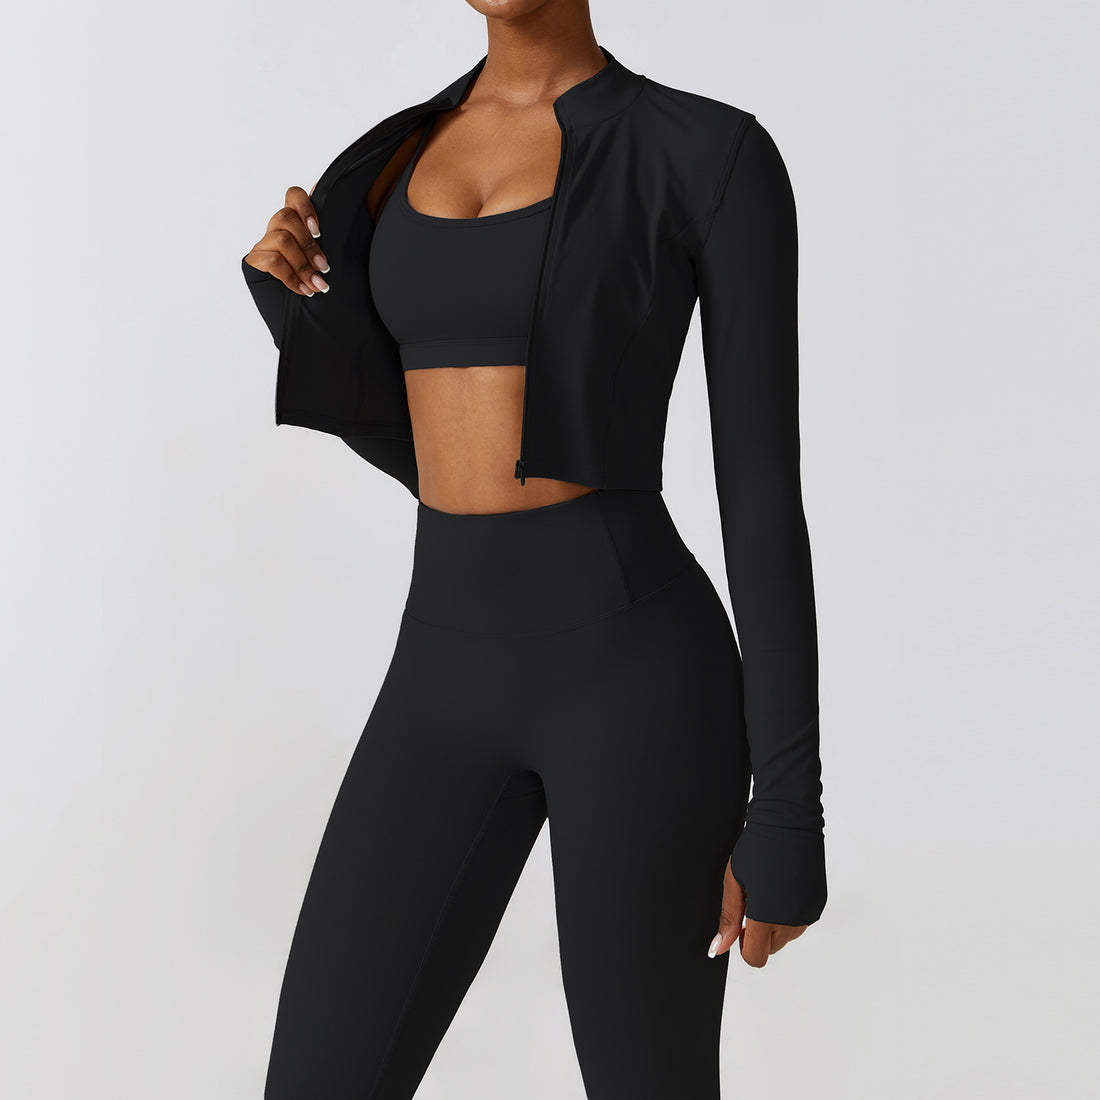 The Best Vibrant Slimming 3-Piece Fitness Suit For Women